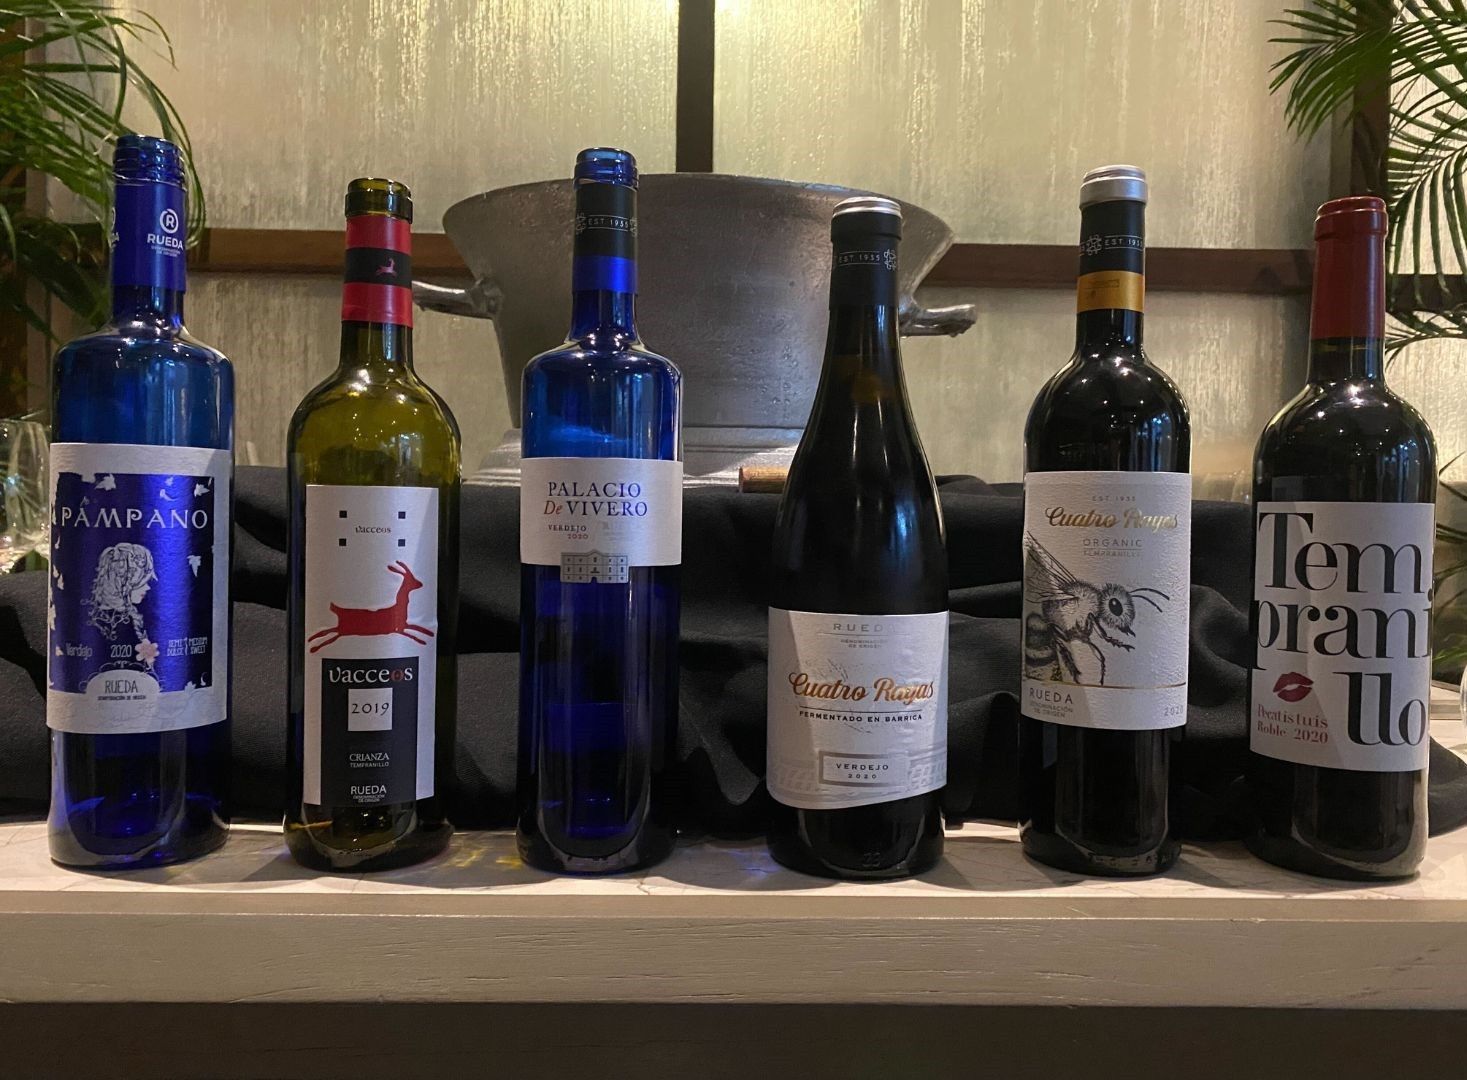 Young Spanish wines make their way to Tagaytay